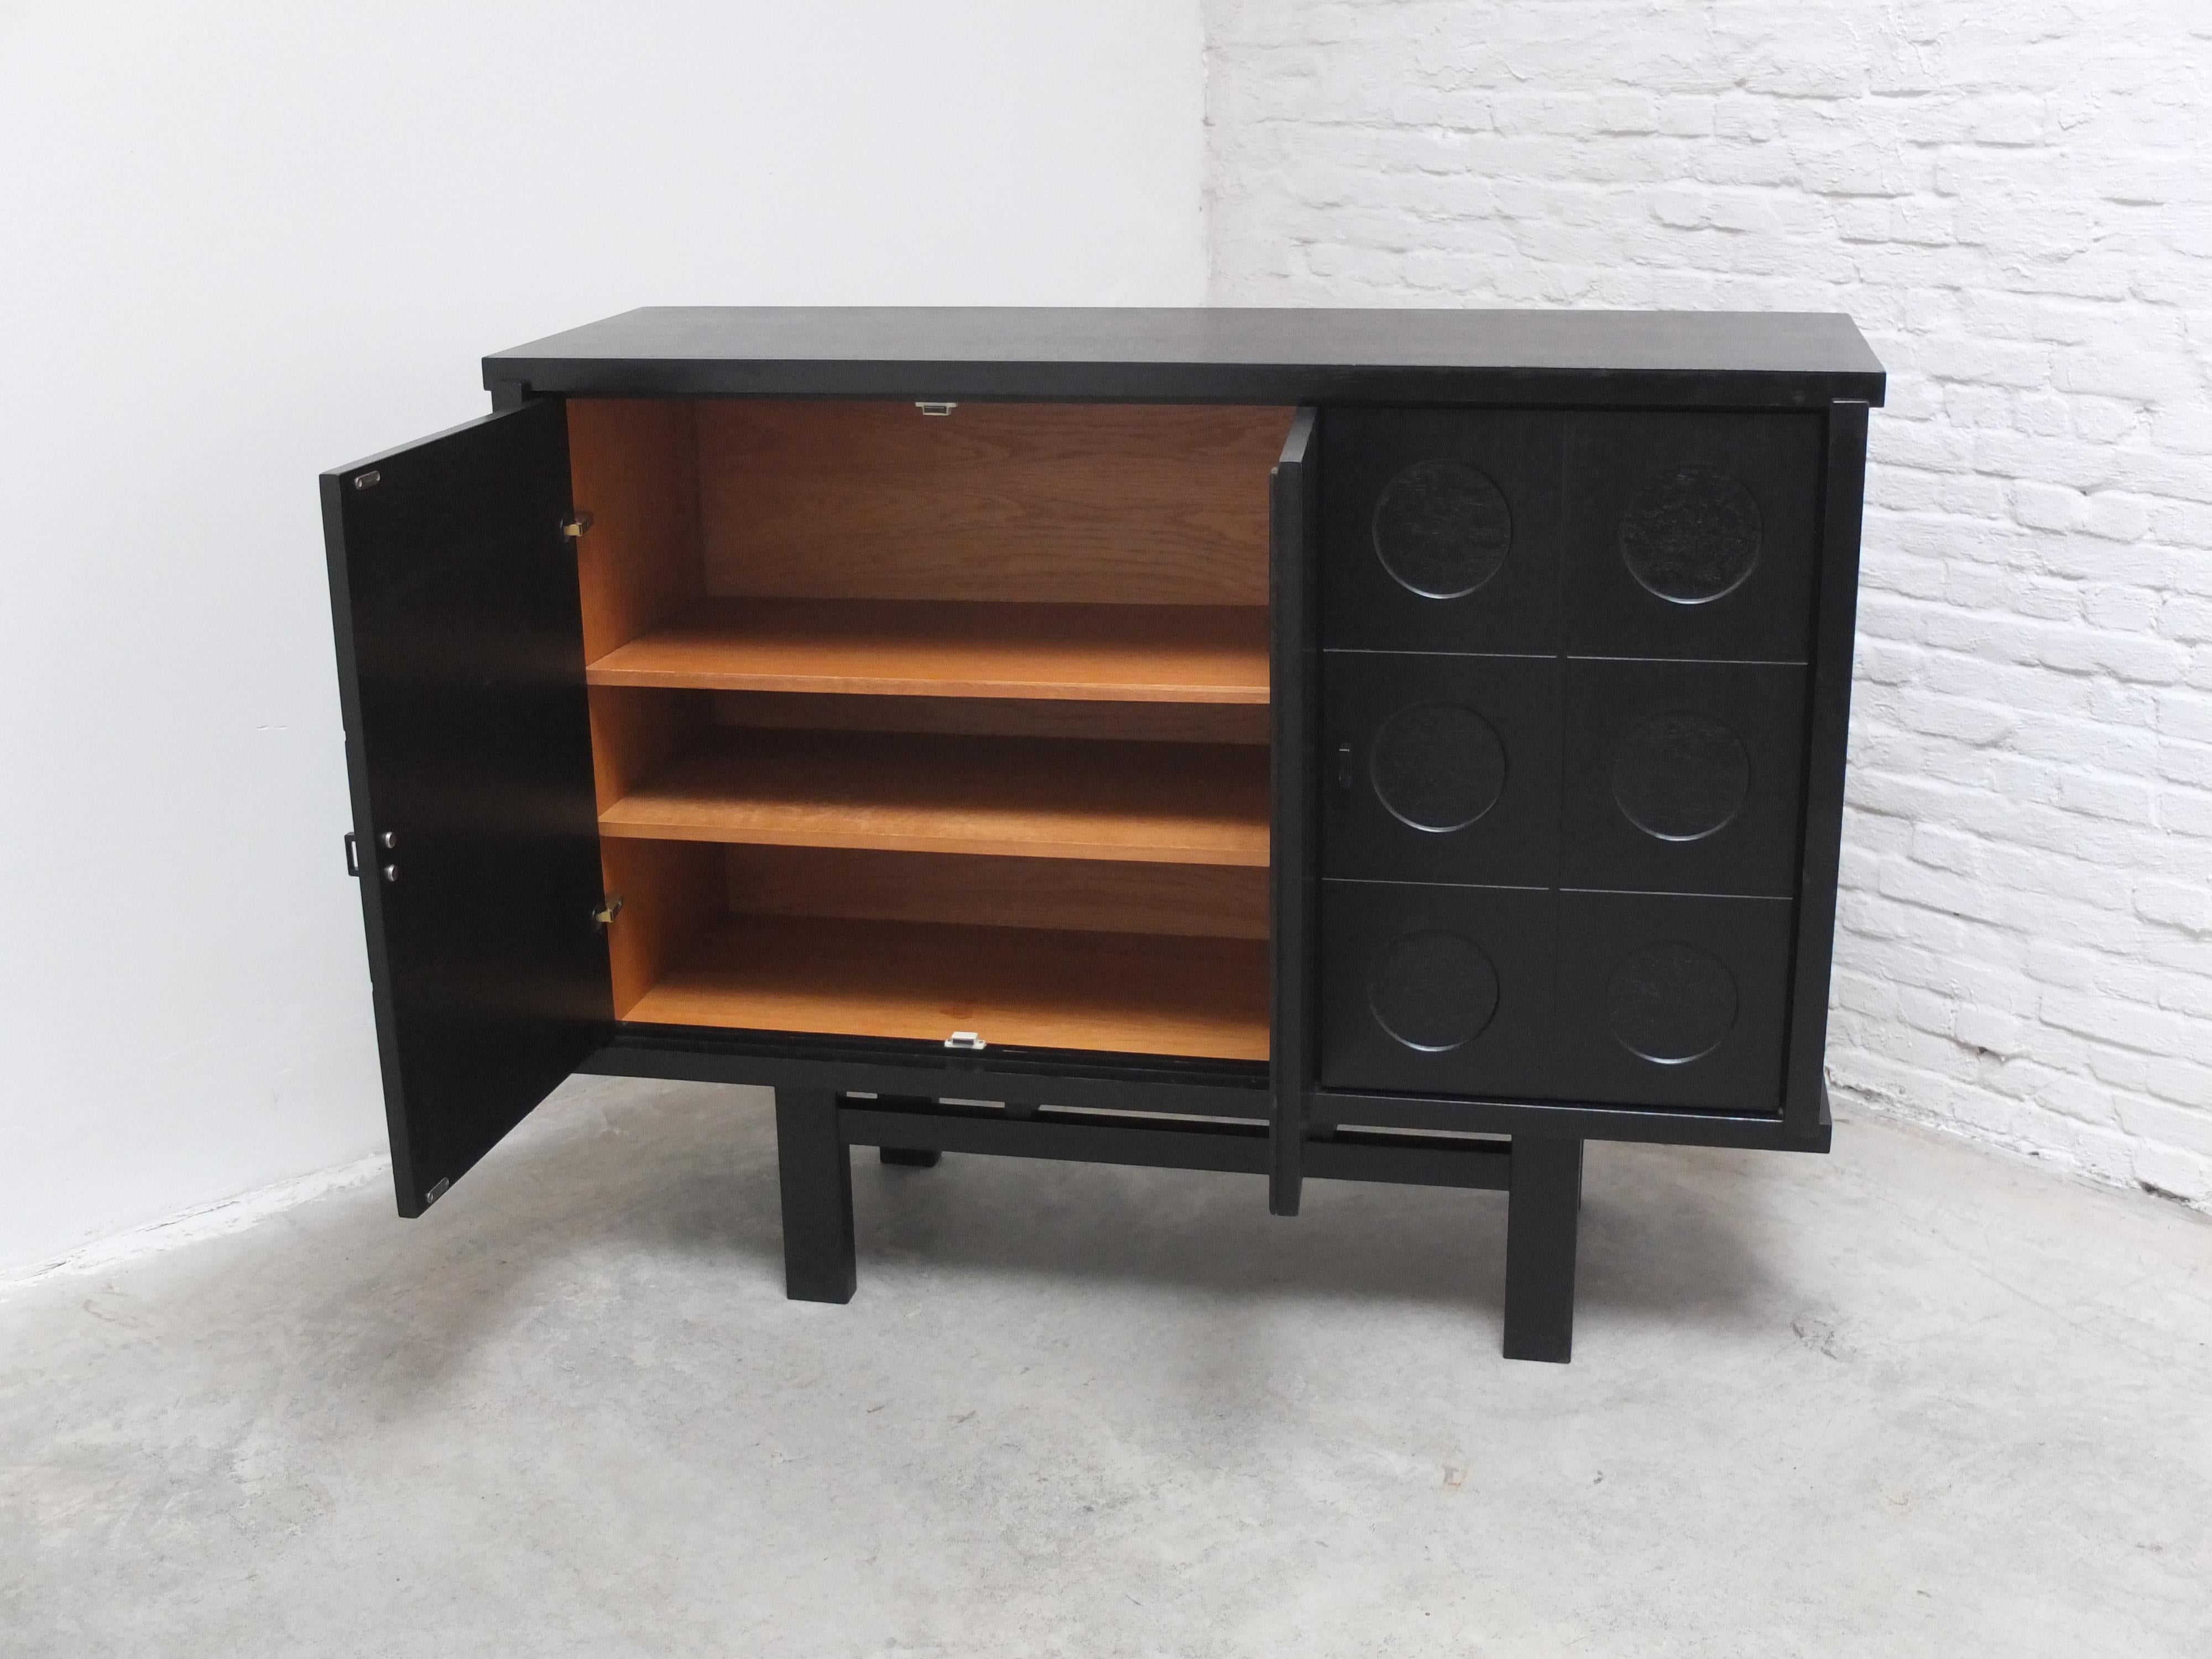 Belgian Graphical Cabinet in Black Stained Oak, 1970s For Sale 5